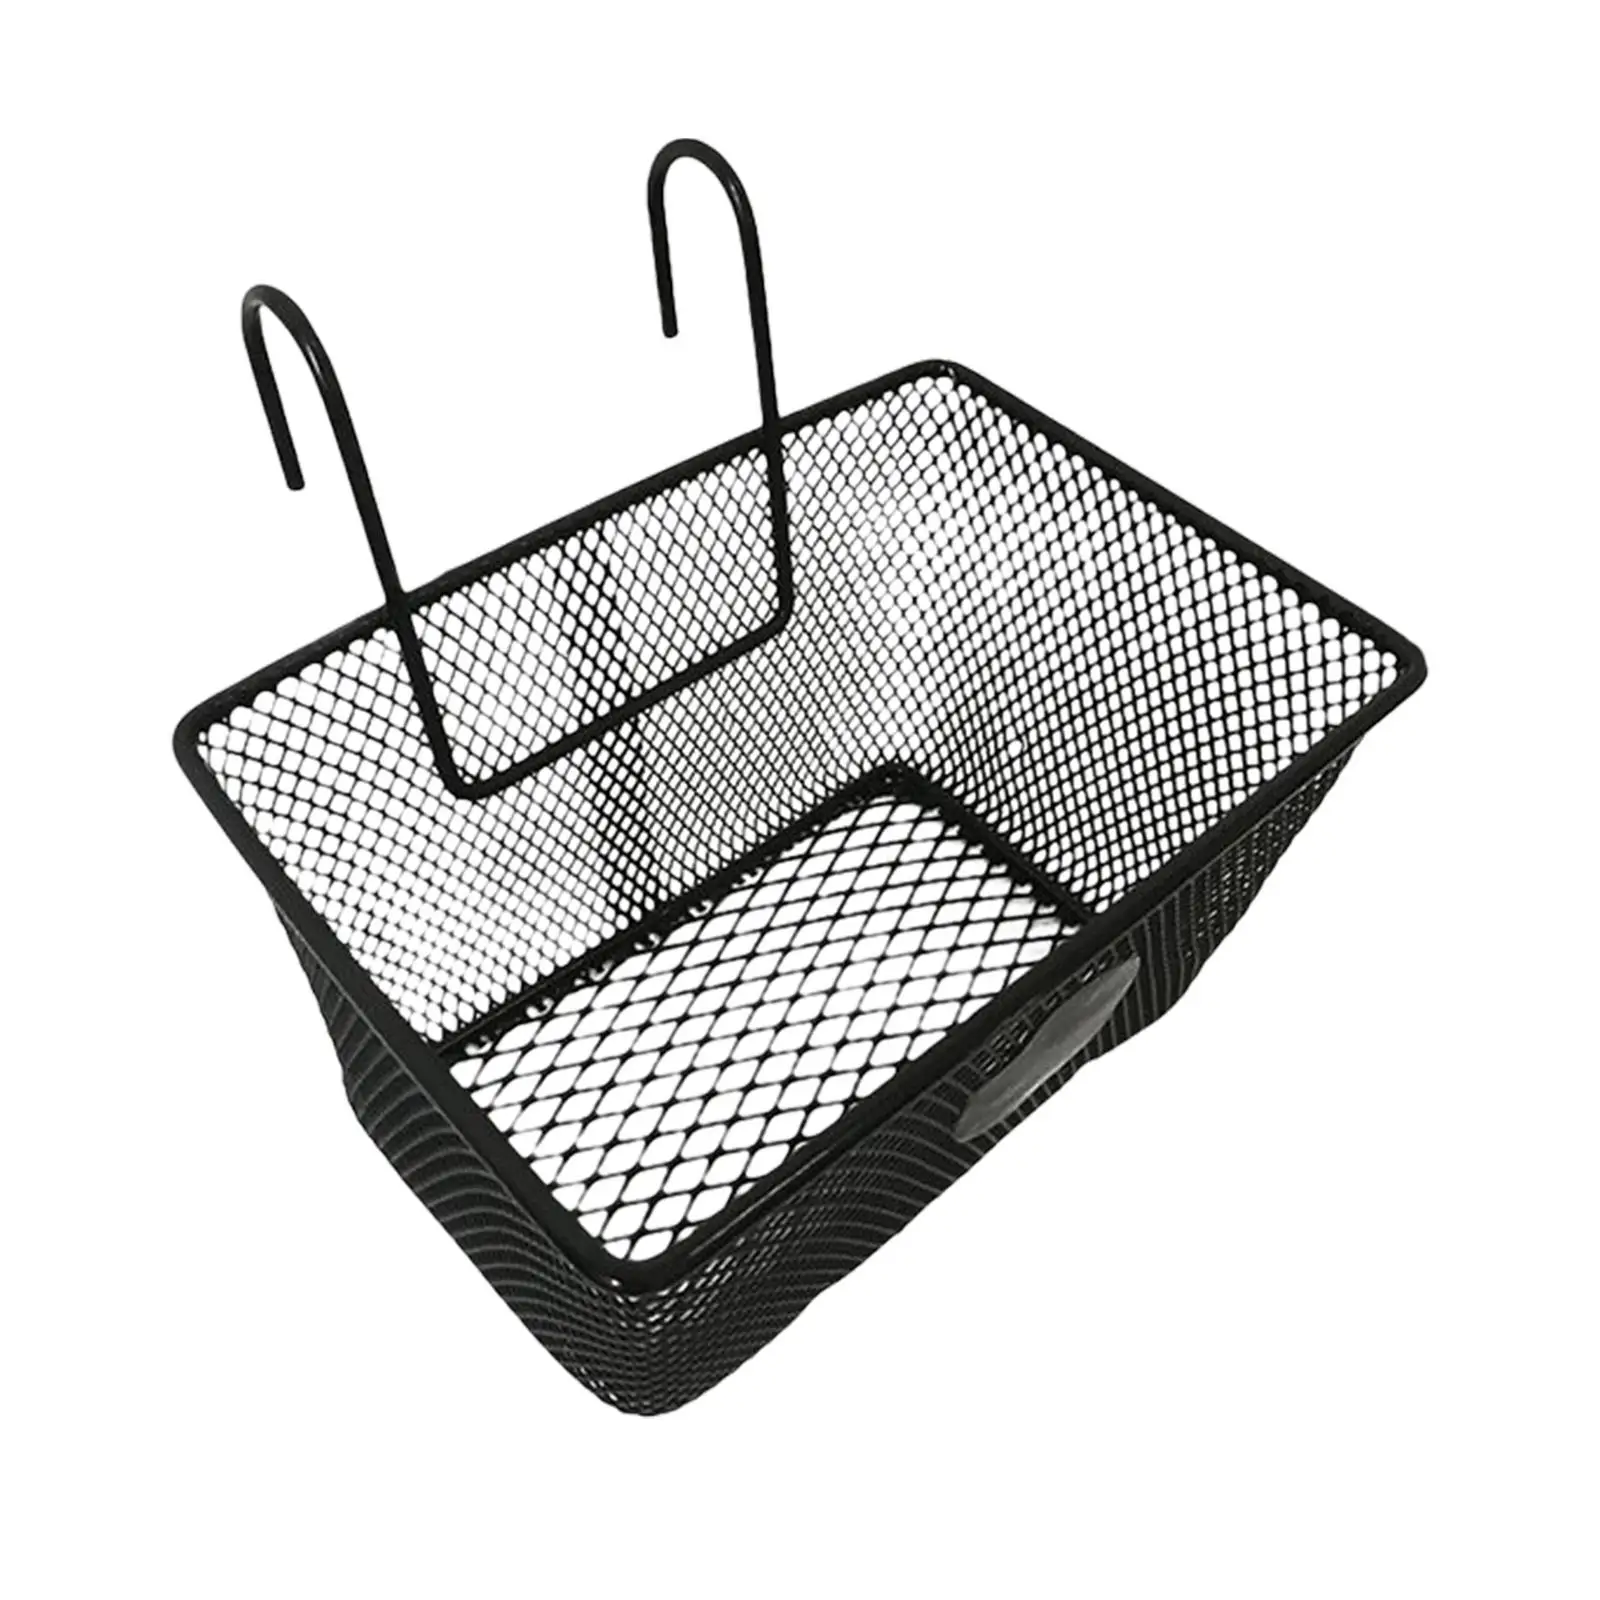 Bike Basket Hanging Camping Riding Accessories Storage Case Carry Large